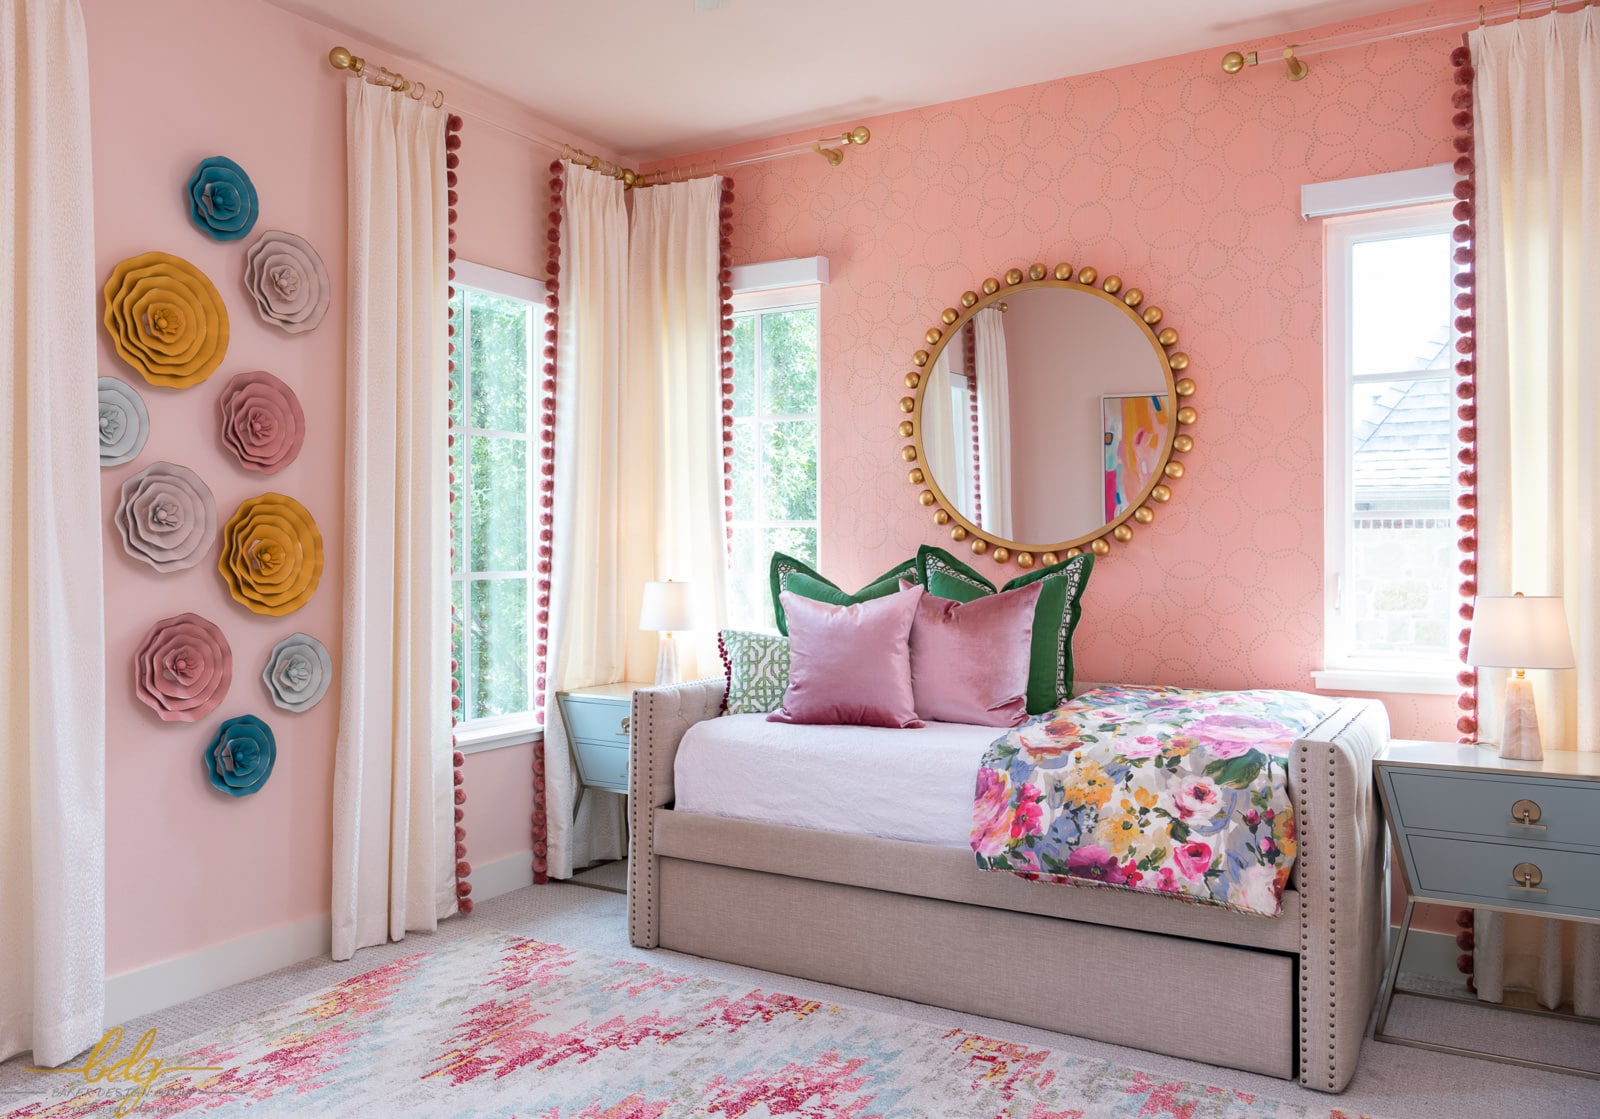 Baker Design Group - Think Pink & Bright Colors This Spring